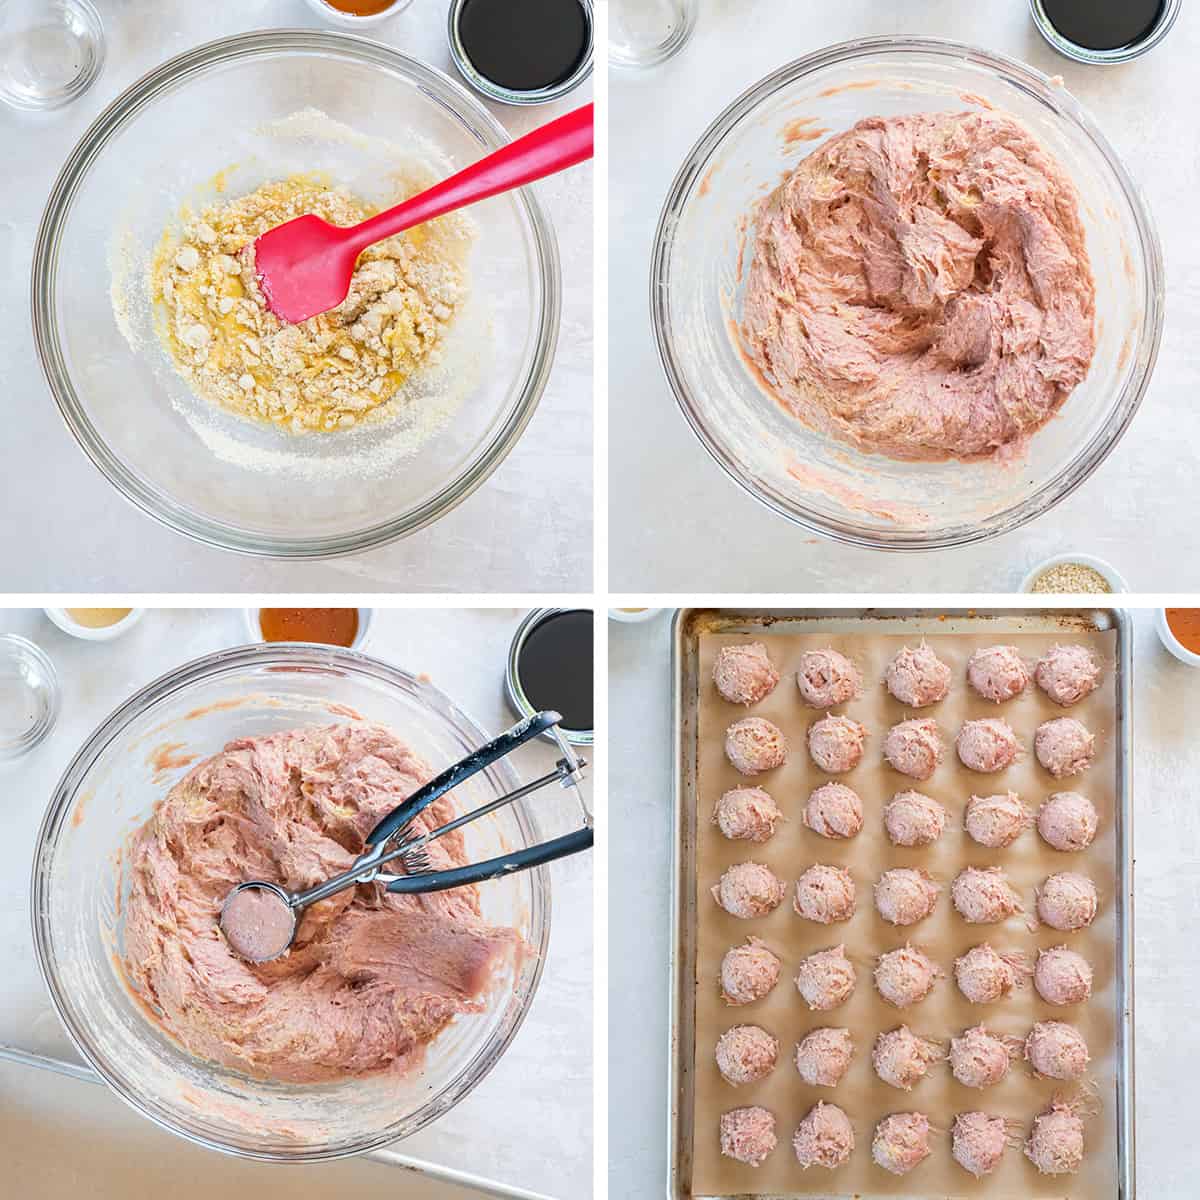 Four images of meatball ingredients being combined in a glass mixing bowl and scooped on to a baking sheet.